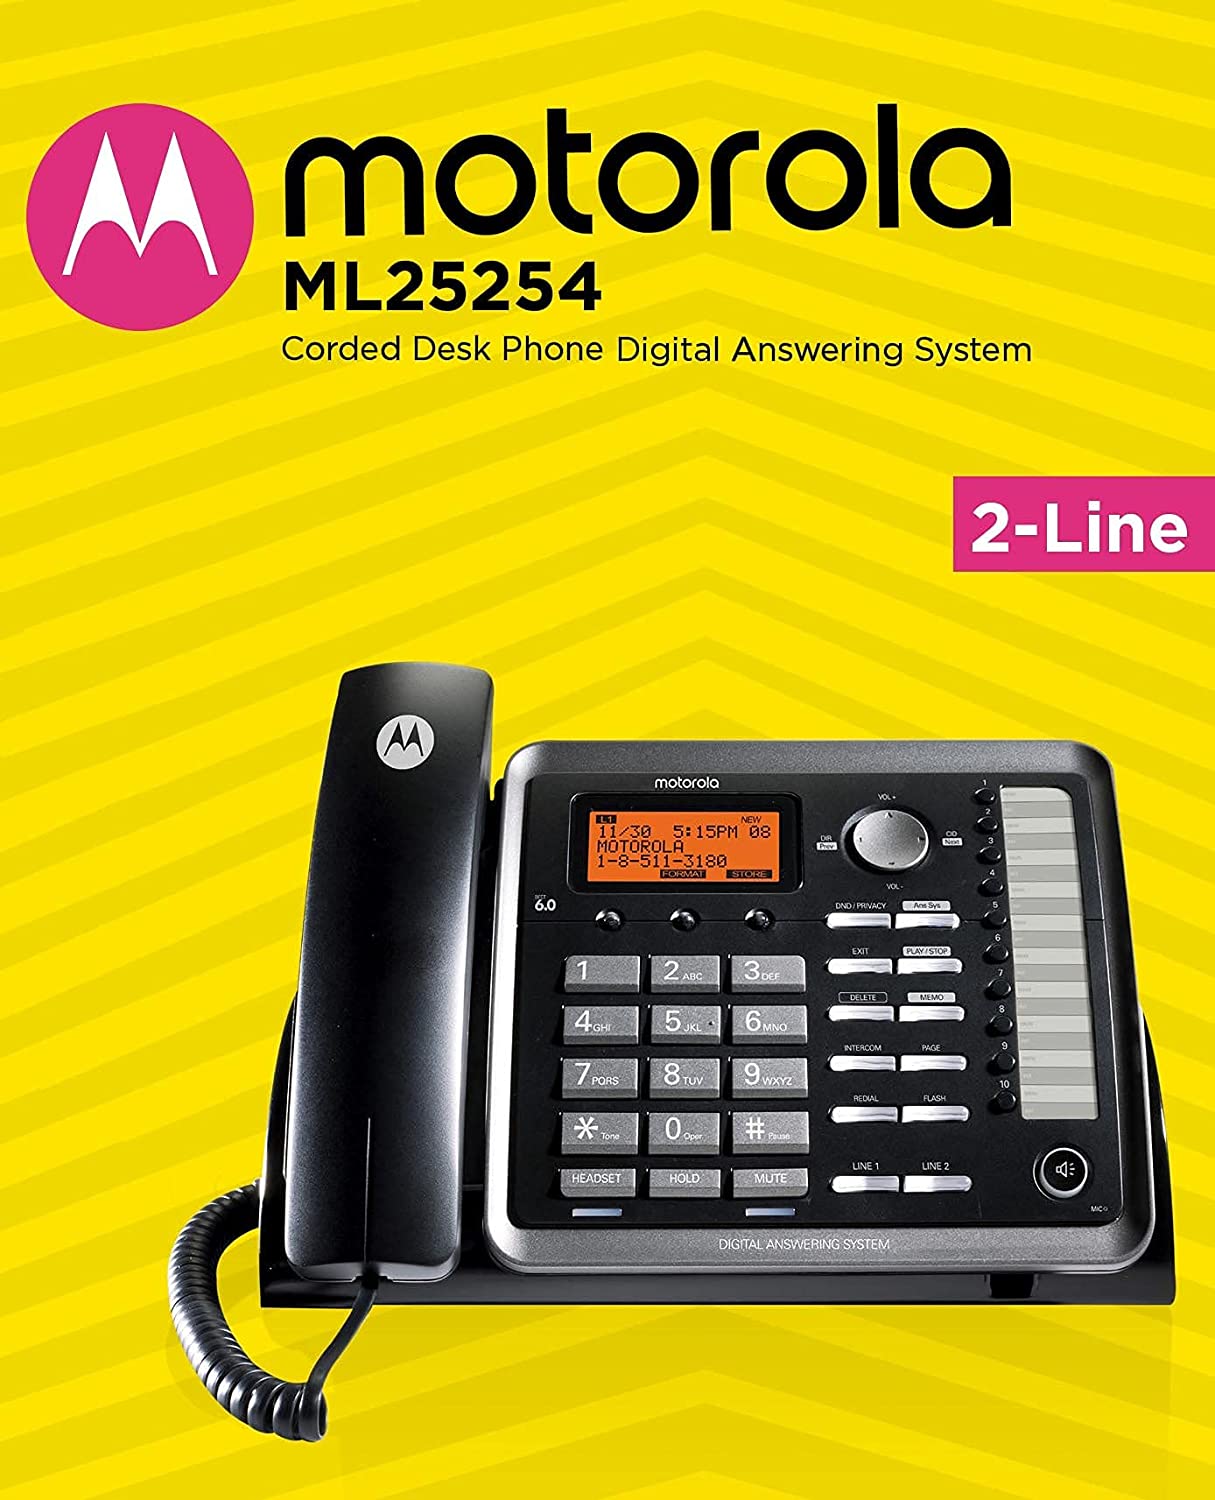 Motorola ML25254 Corded 2-Line Business Phone with 3x Cordless Handsets, 10' Cat5e Cable, 6 AAA Batteries - image 2 of 7